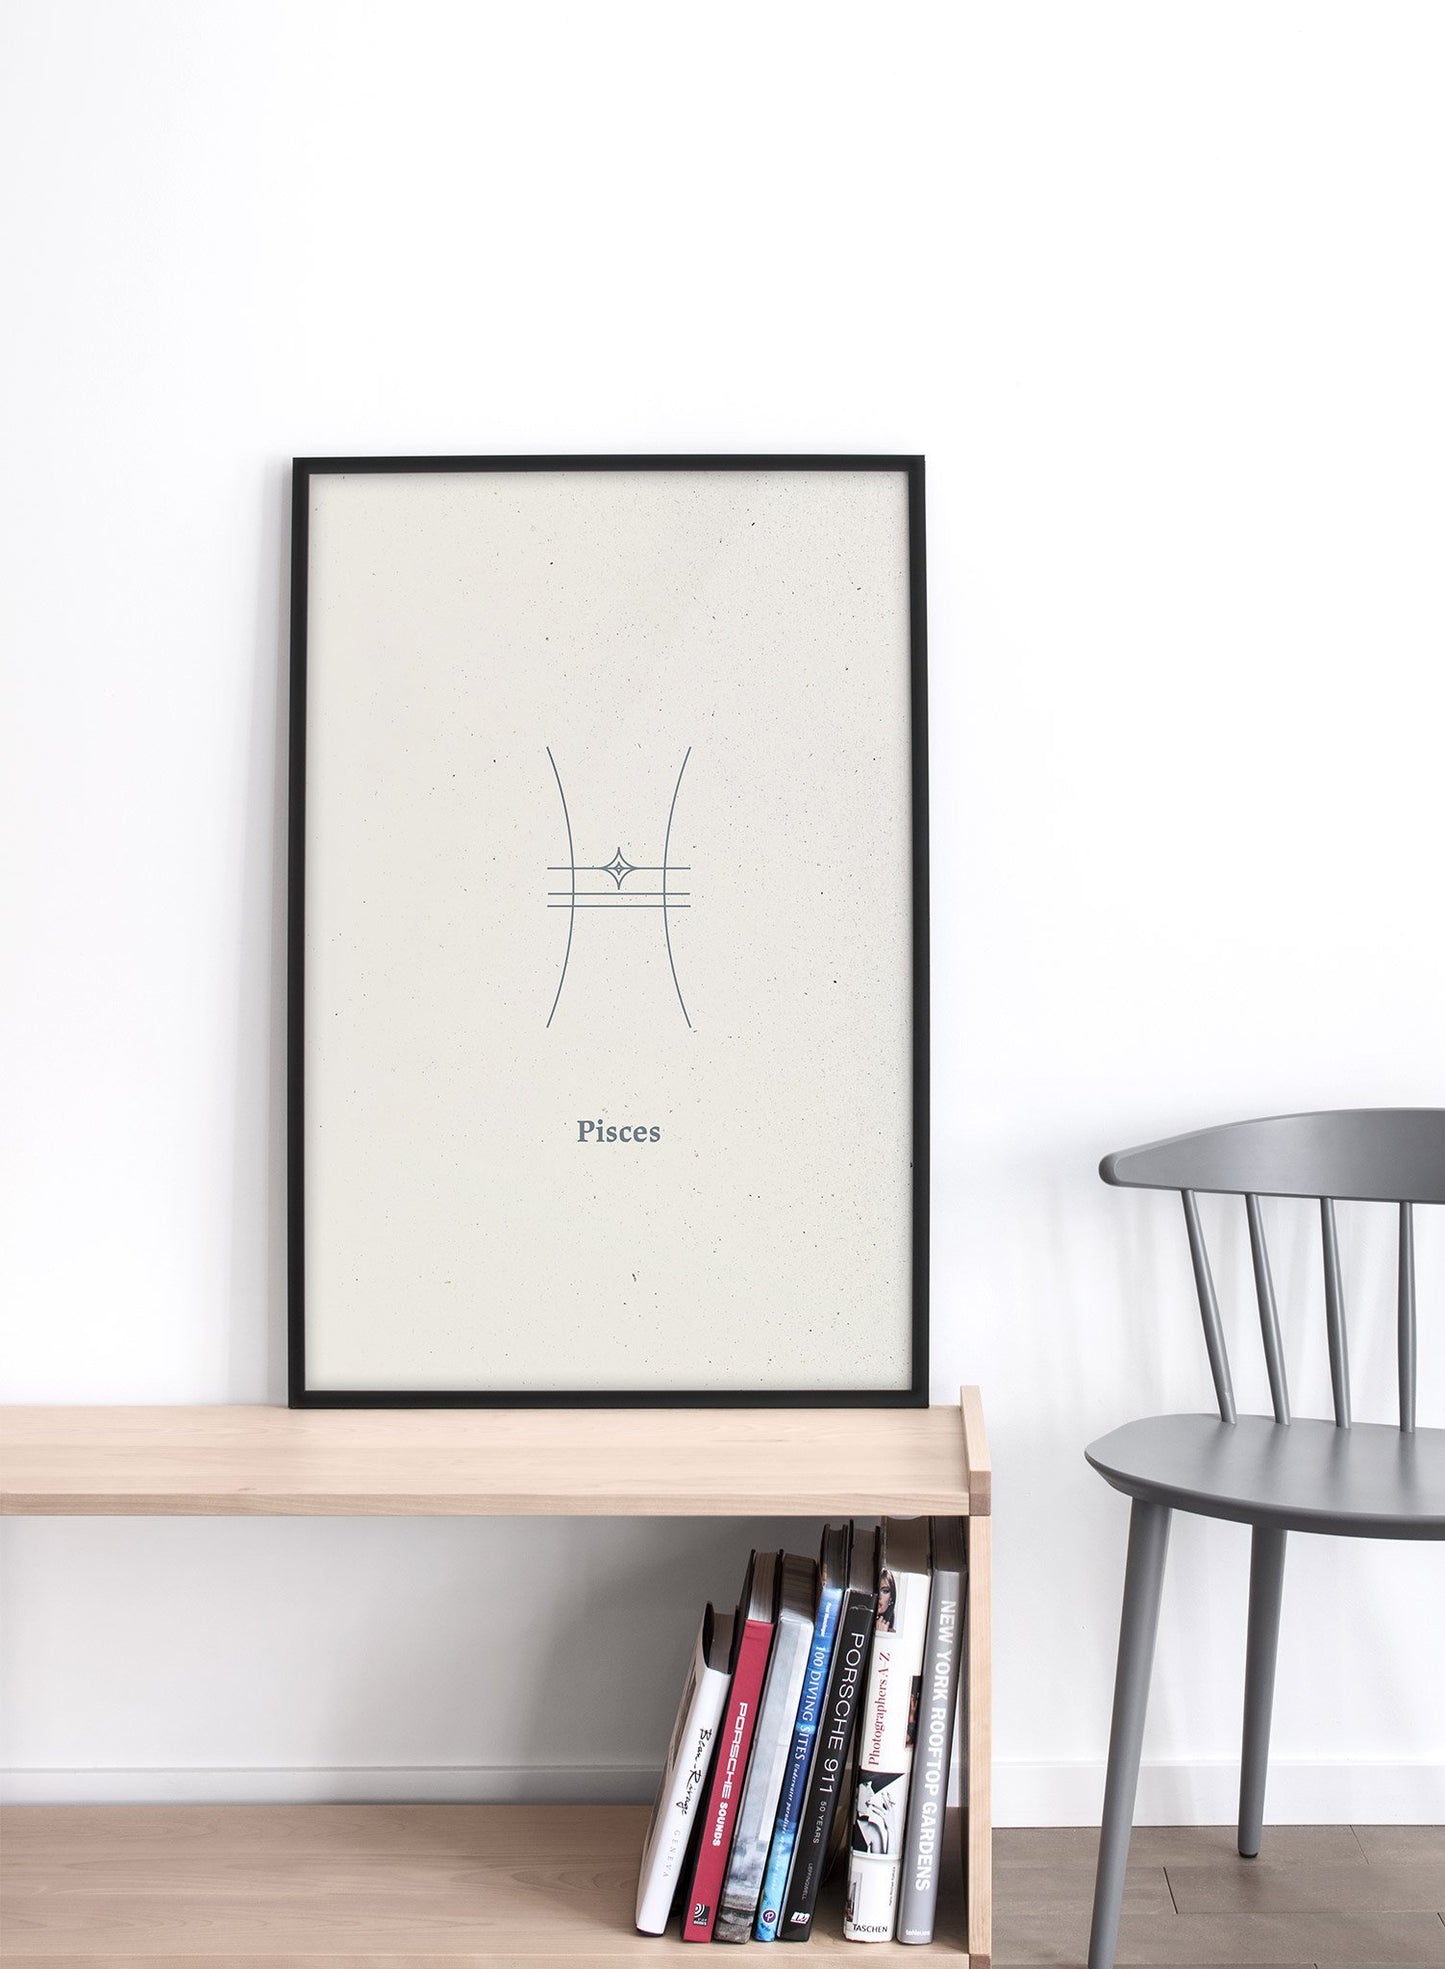 Minimalist celestial illustration poster by Opposite Wall with Pisces symbol - Lifestyle - Living Room